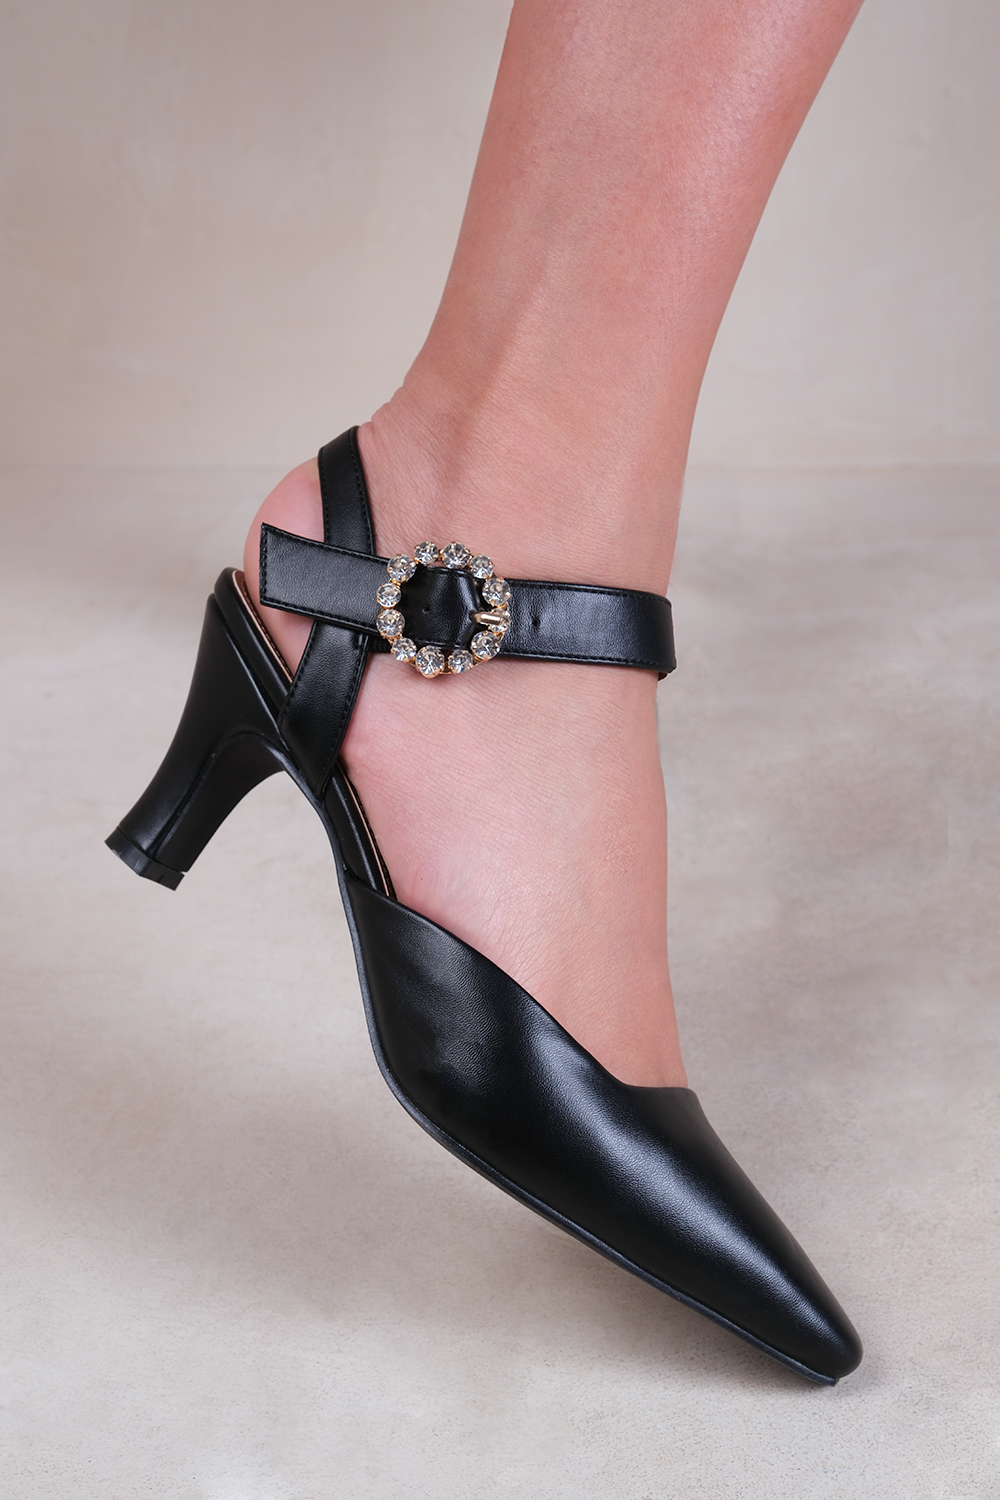 NEW FORM MID HEEL SANDALS WITH DIAMANTE BUCKLE DETAIL IN BLACK FAUX LEATHER